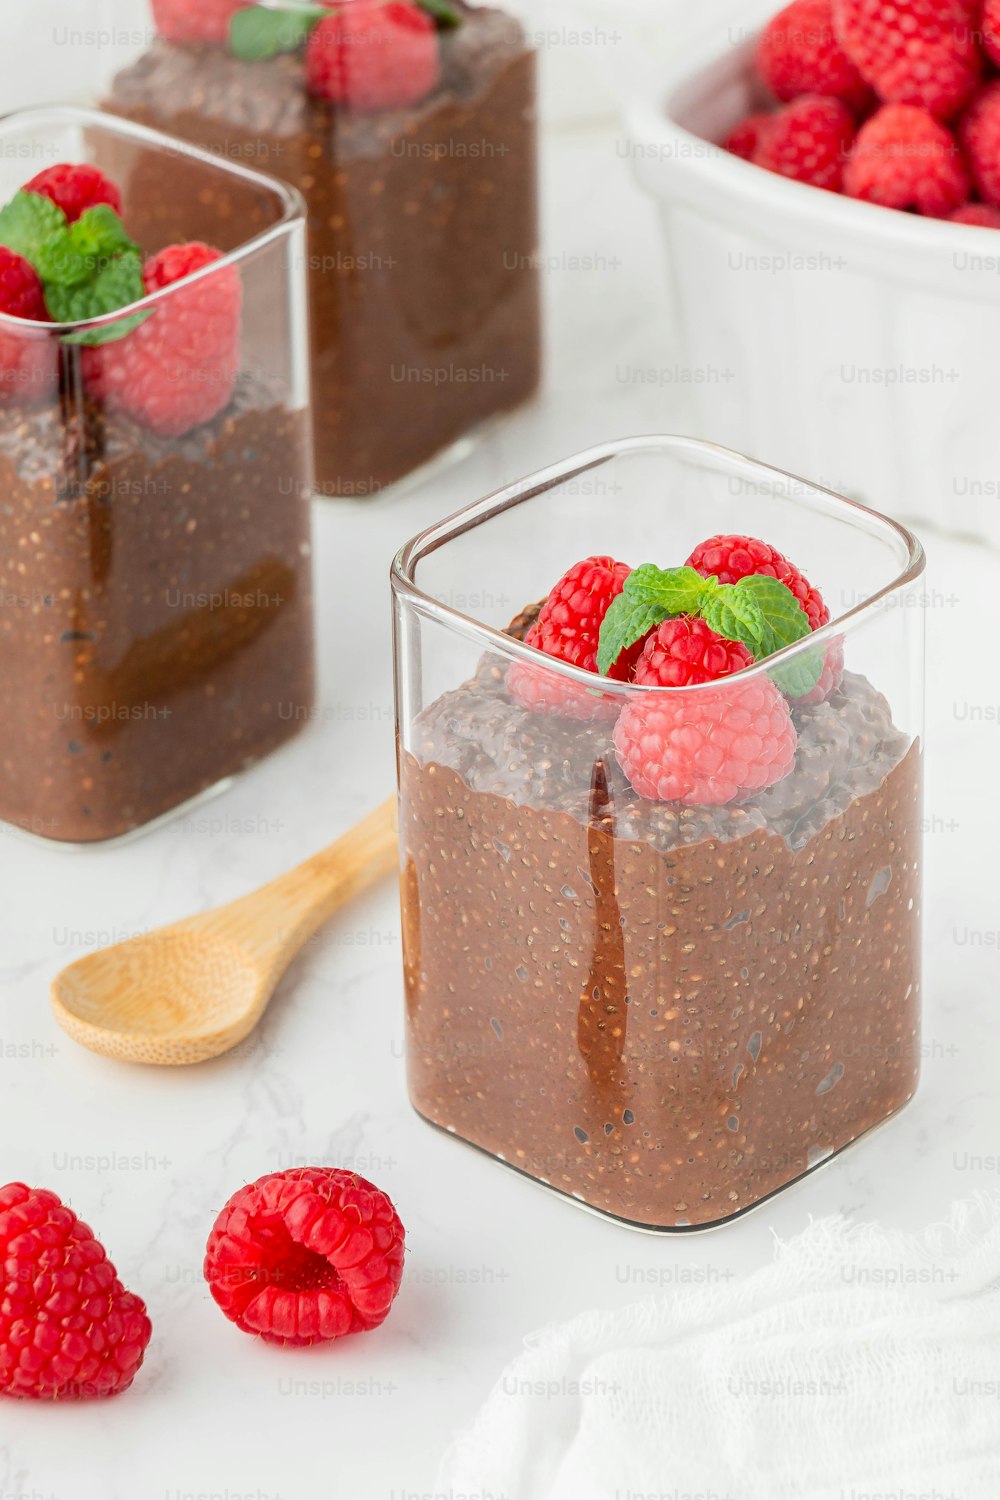 raspberries and chocolate pudding in small glass containers